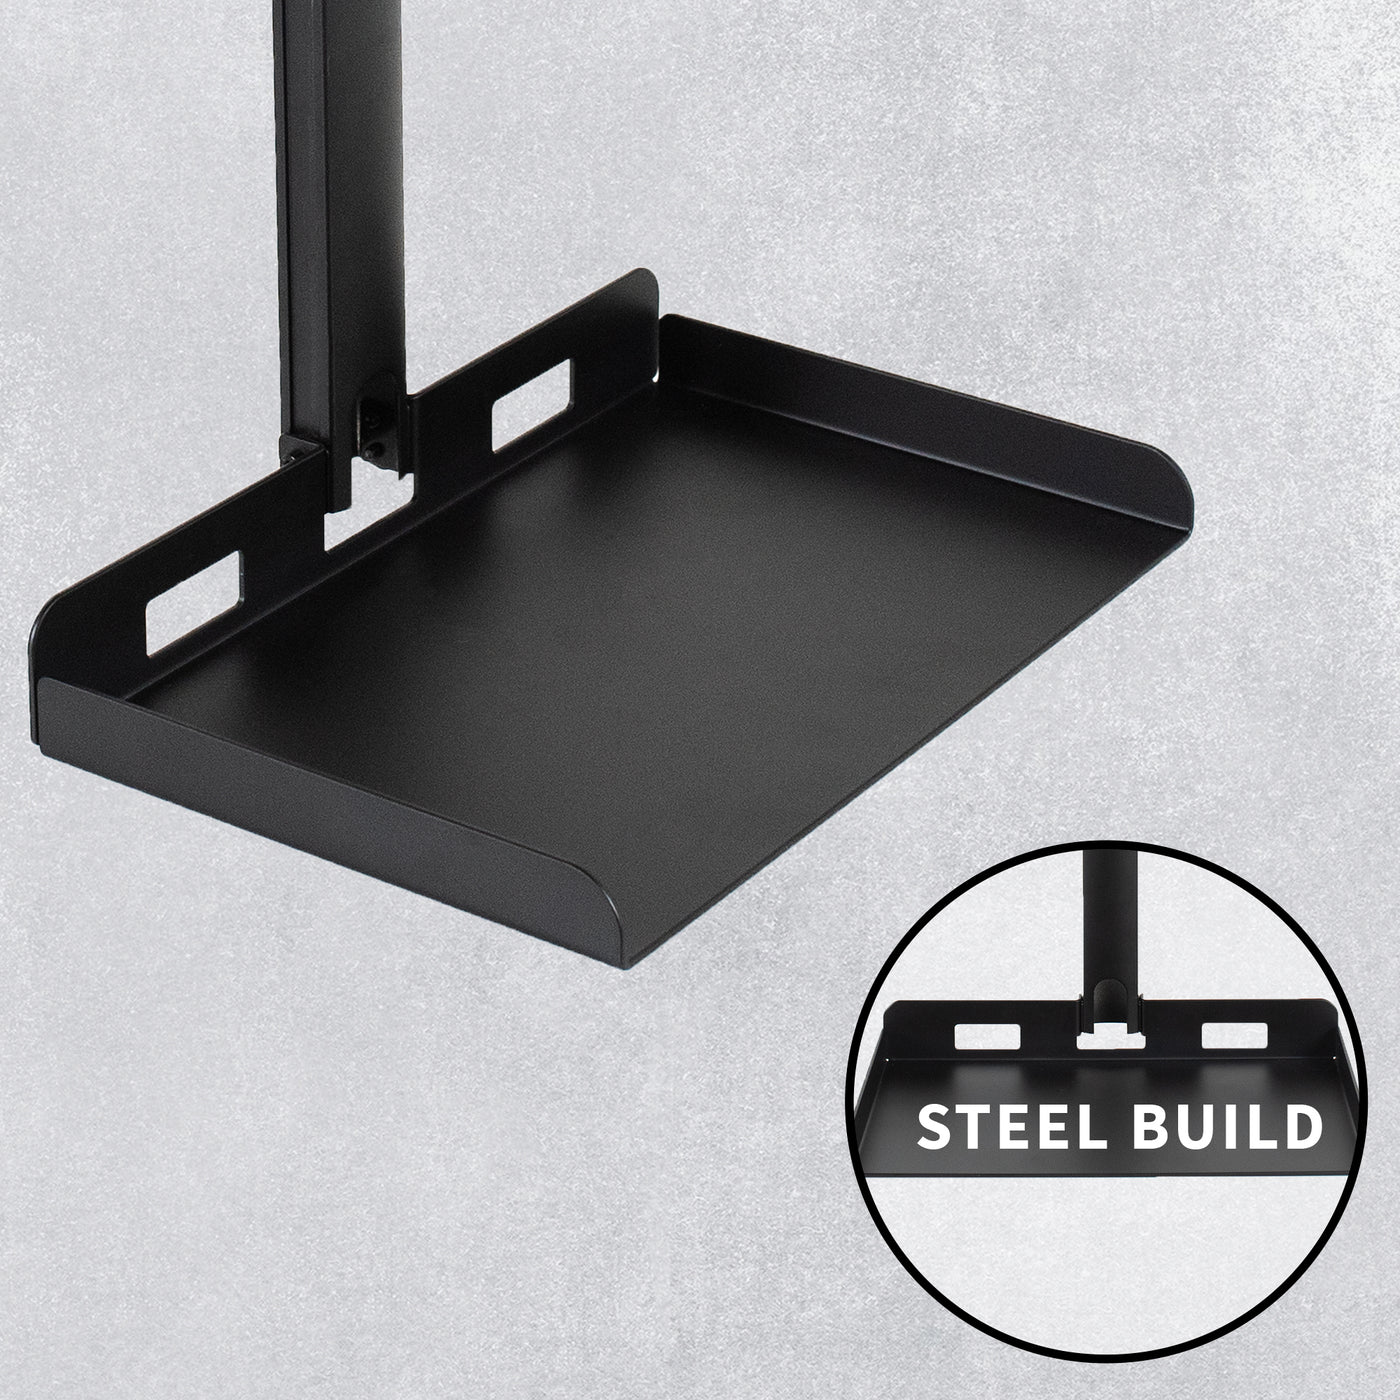 Sturdy structure with a solid steel design for secure projector setup.